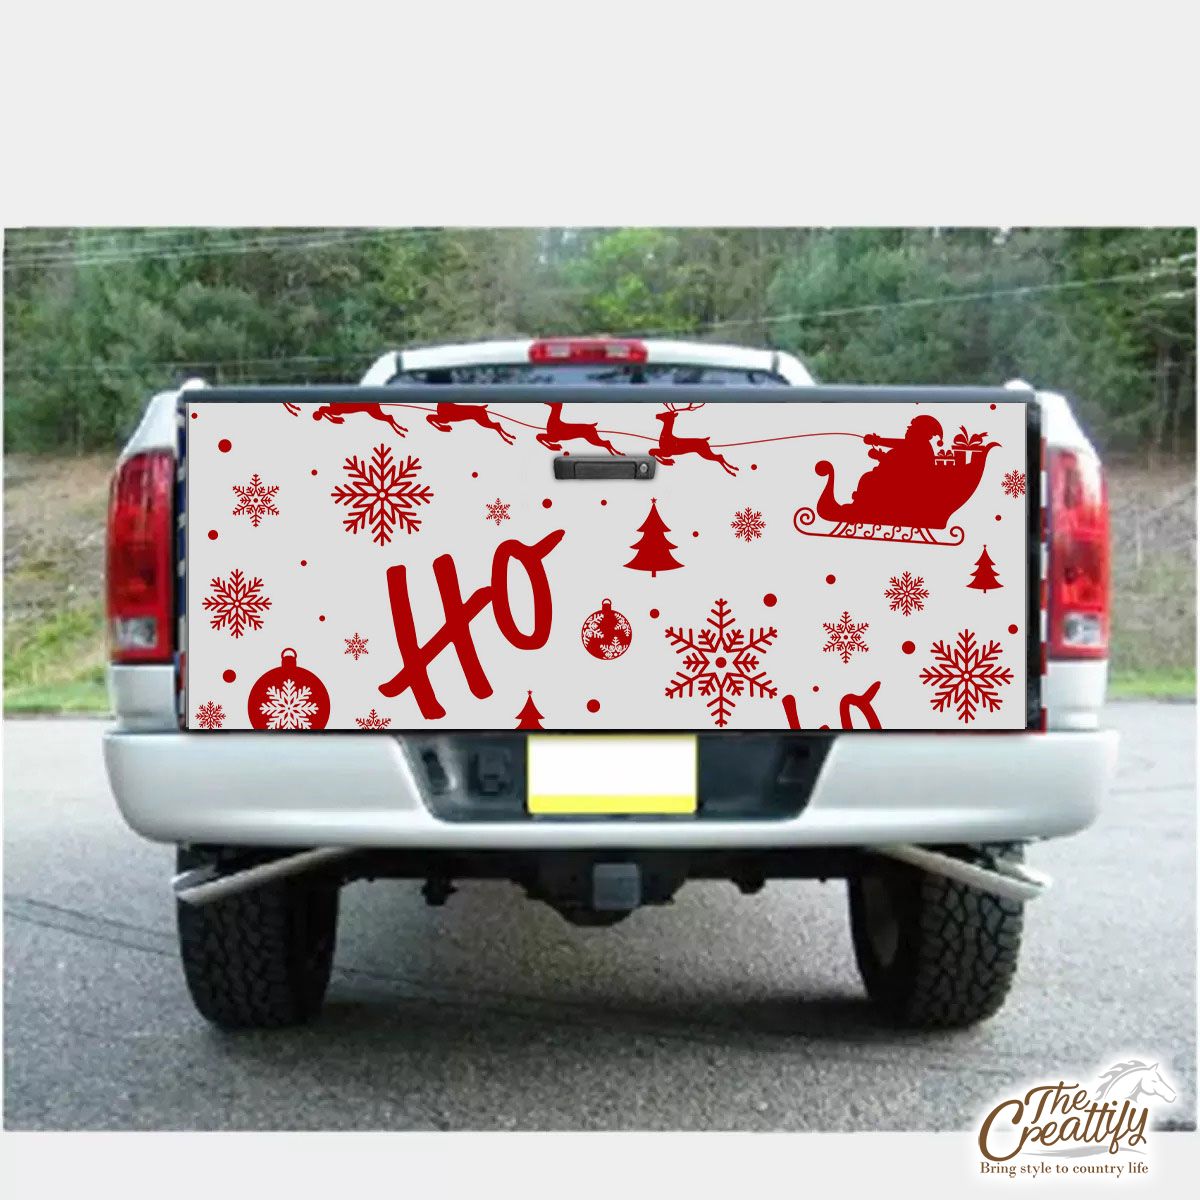 Santa Claus, Santas Reindeer And Christmas Sleigh On The Snowflake Background Truck Bed Decal